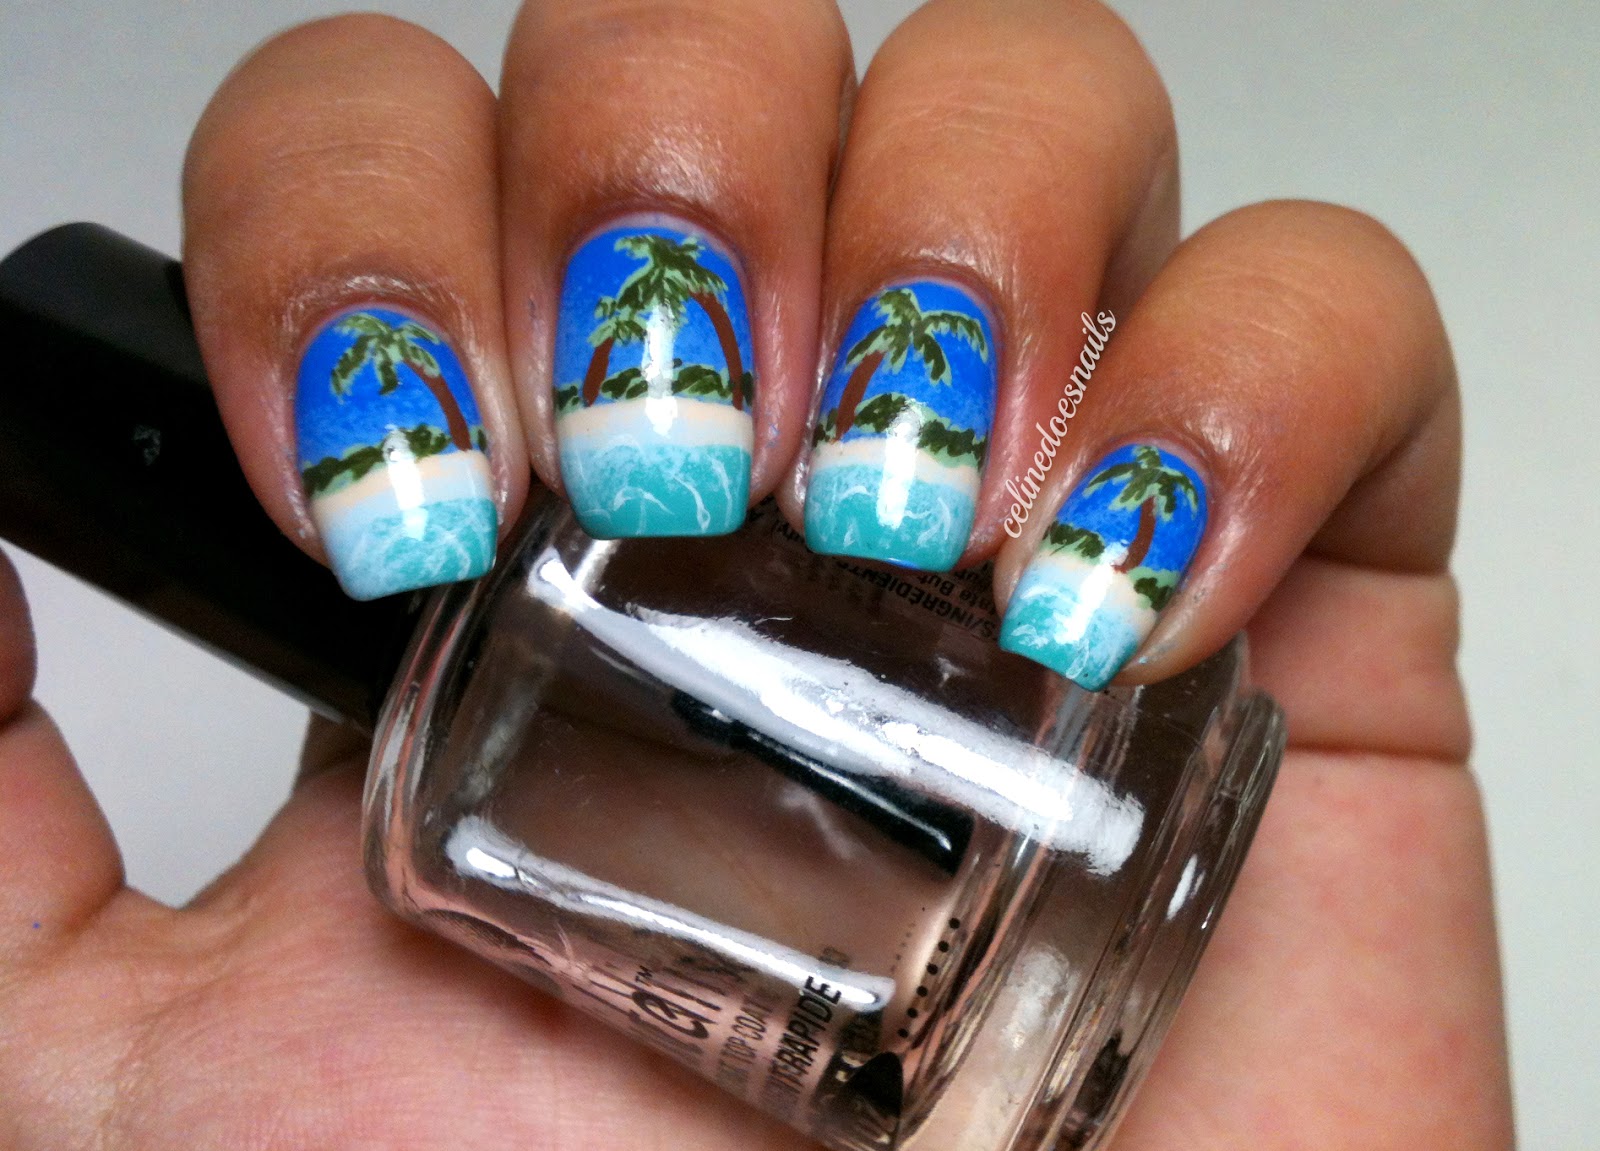 3. Palm Tree Accent Nails - wide 4